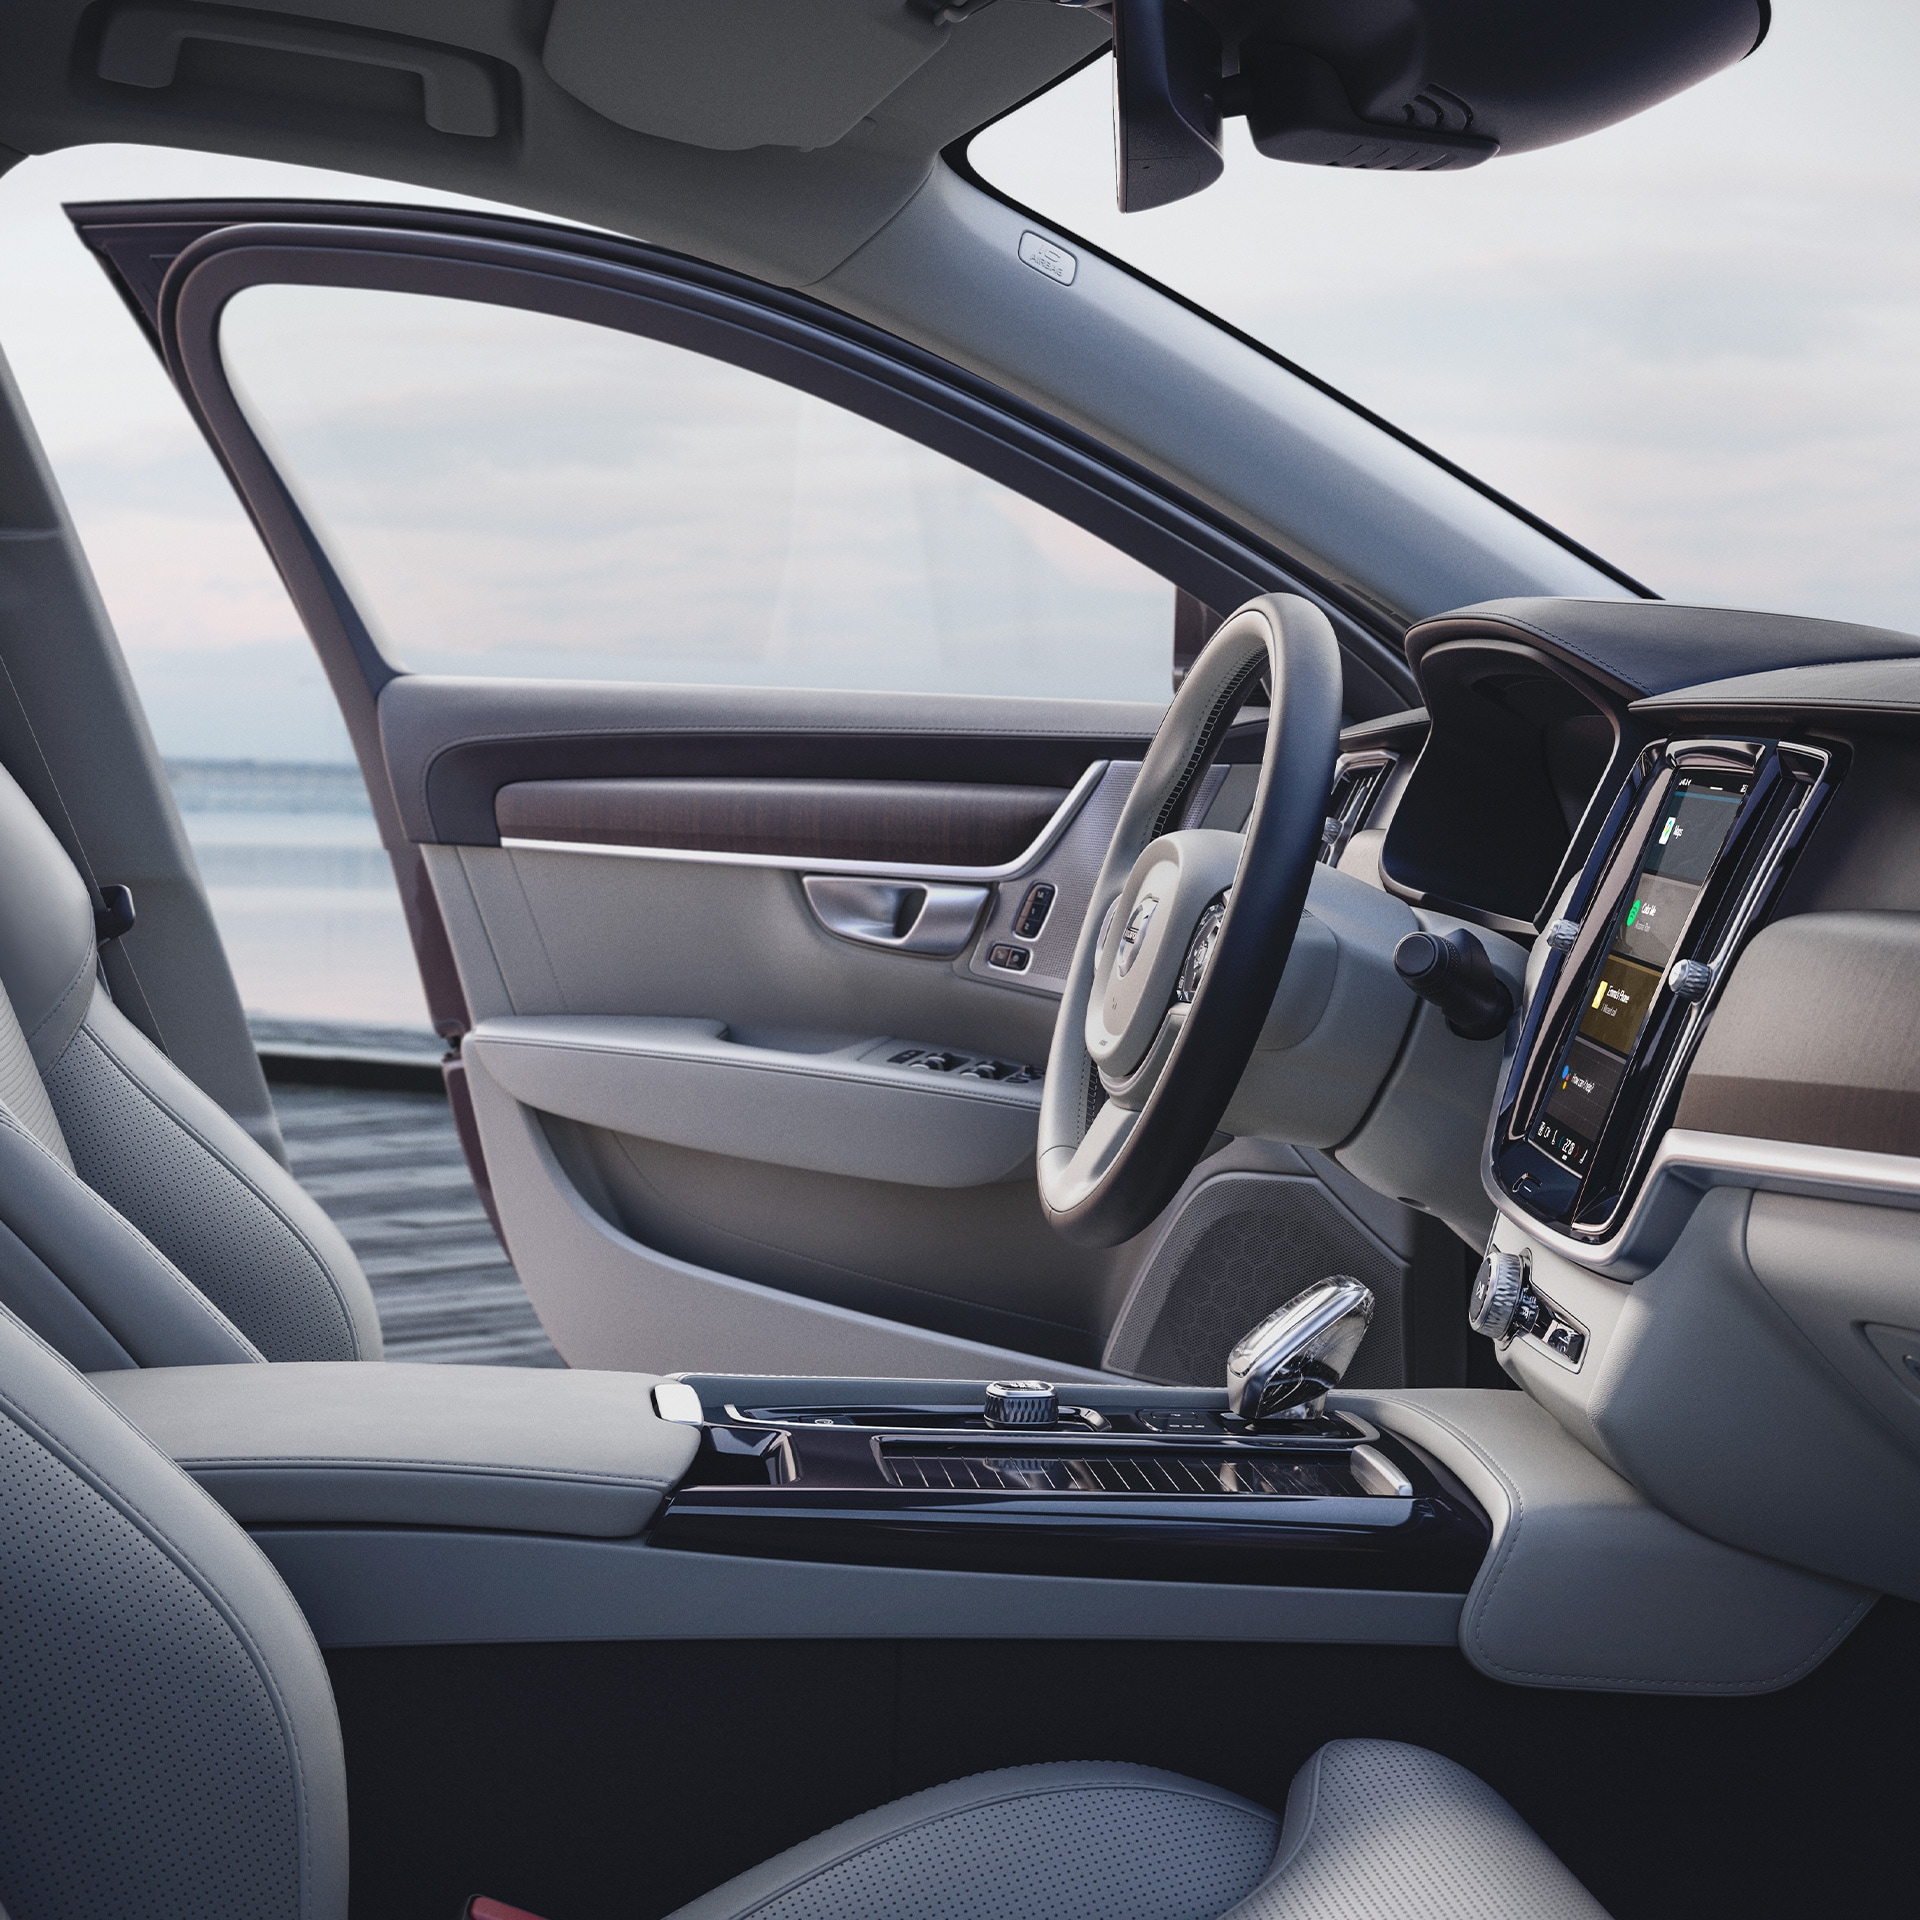 Inside of a Volvo S90 with light interior.